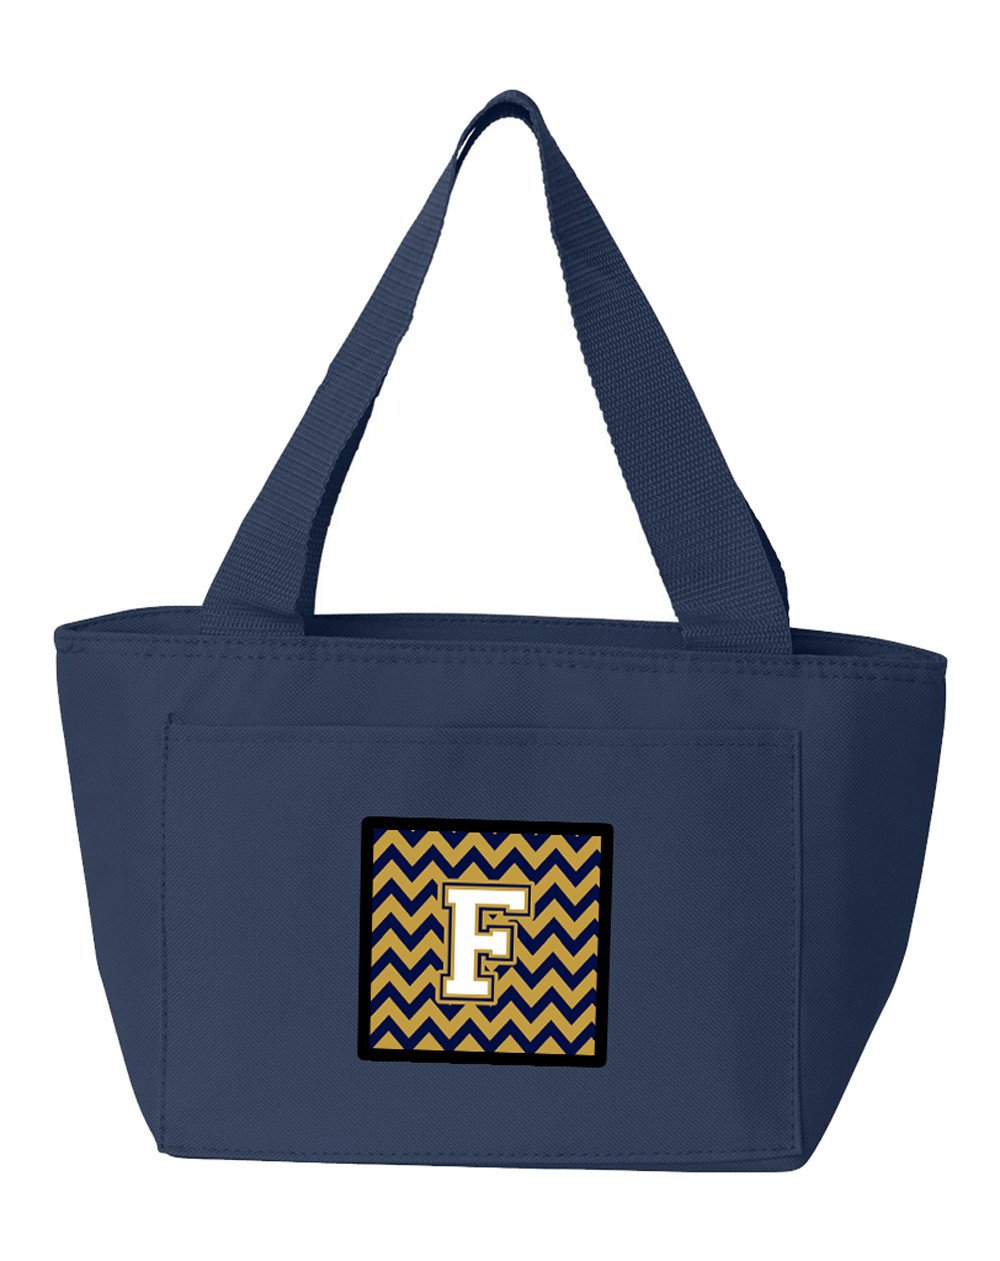 Letter F Chevron Navy Blue and Gold Lunch Bag CJ1057-FNA-8808 by Caroline's Treasures